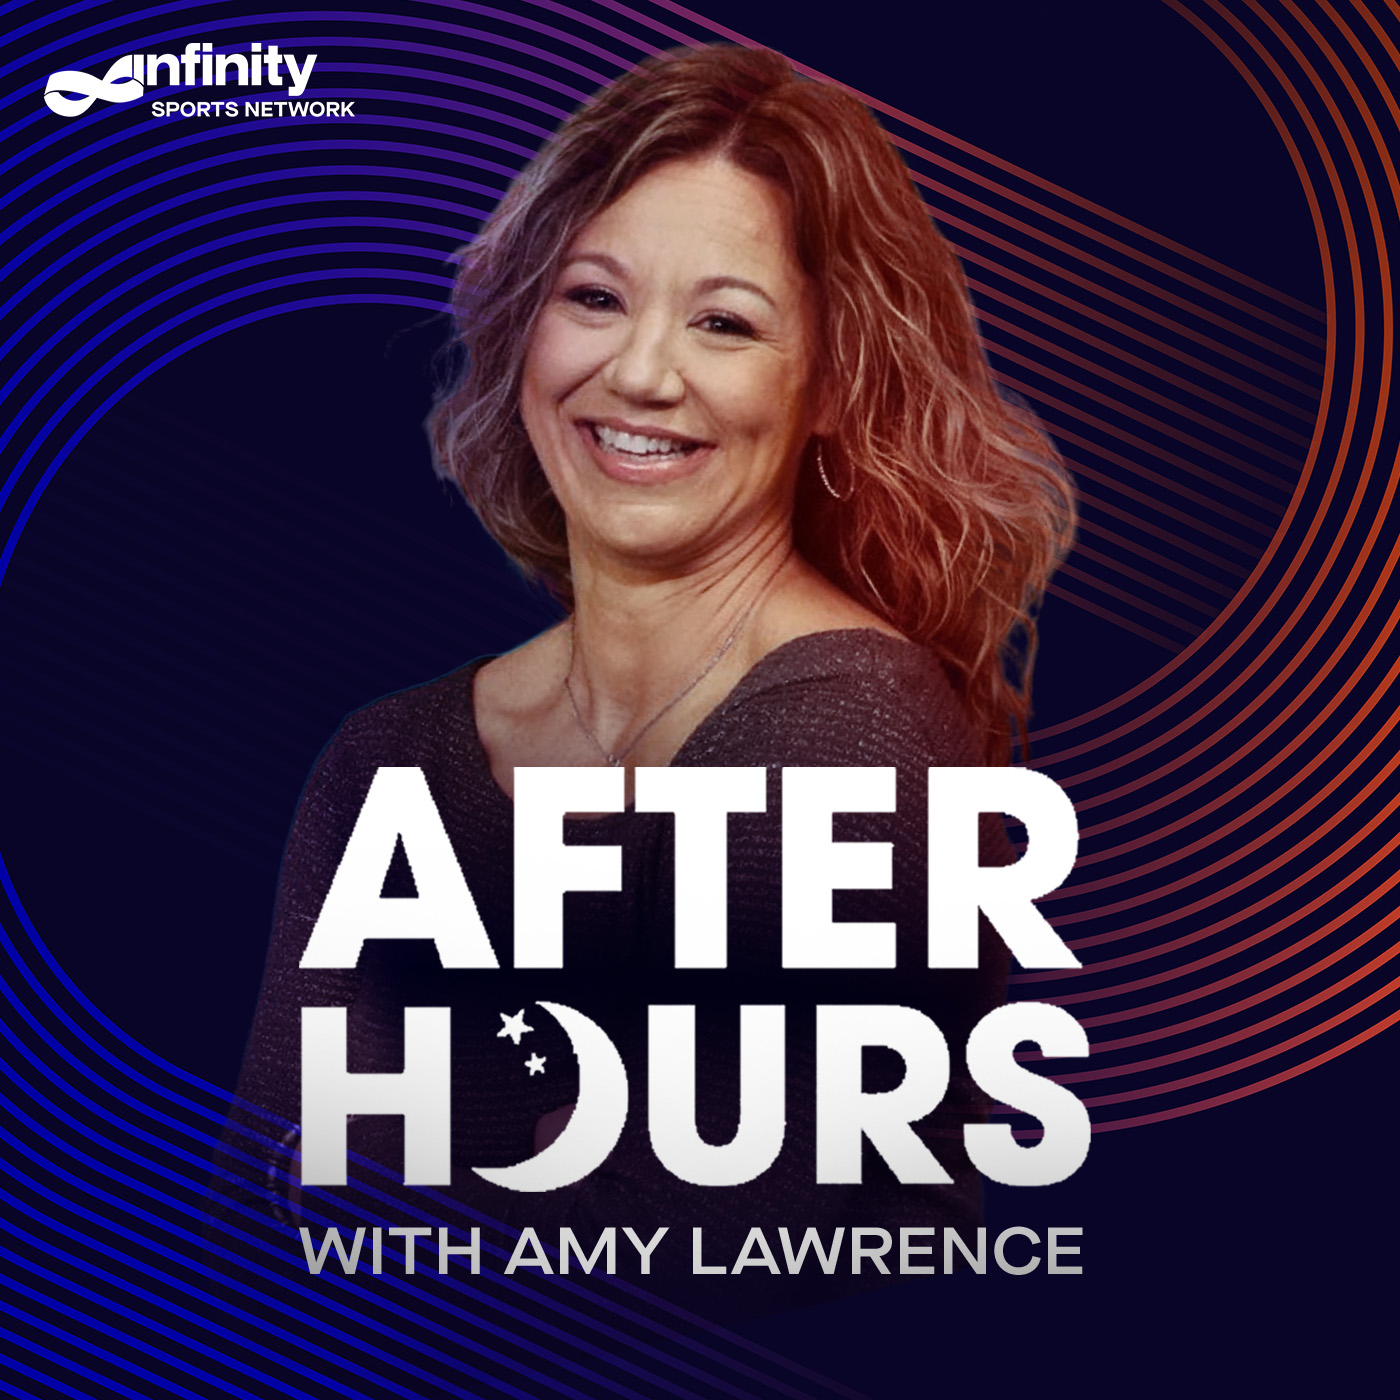 11-4-21 After Hours with Amy Lawrence PODCAST: Hour 2